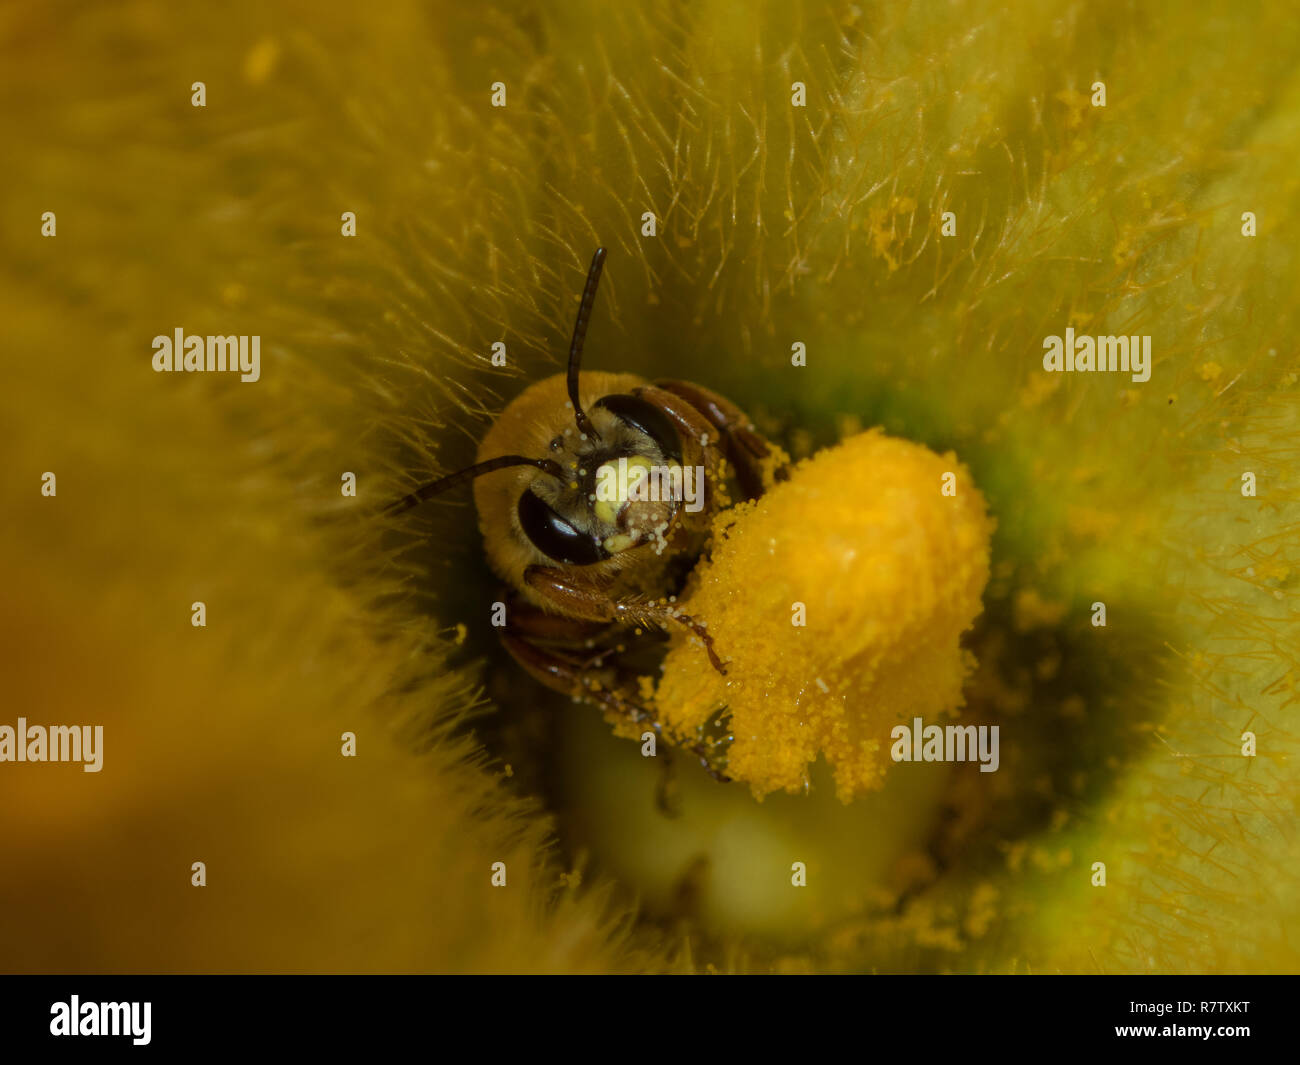 A close up look at a honey bee deep inside the bloom of a zucchini plant gathers pollen. Stock Photo